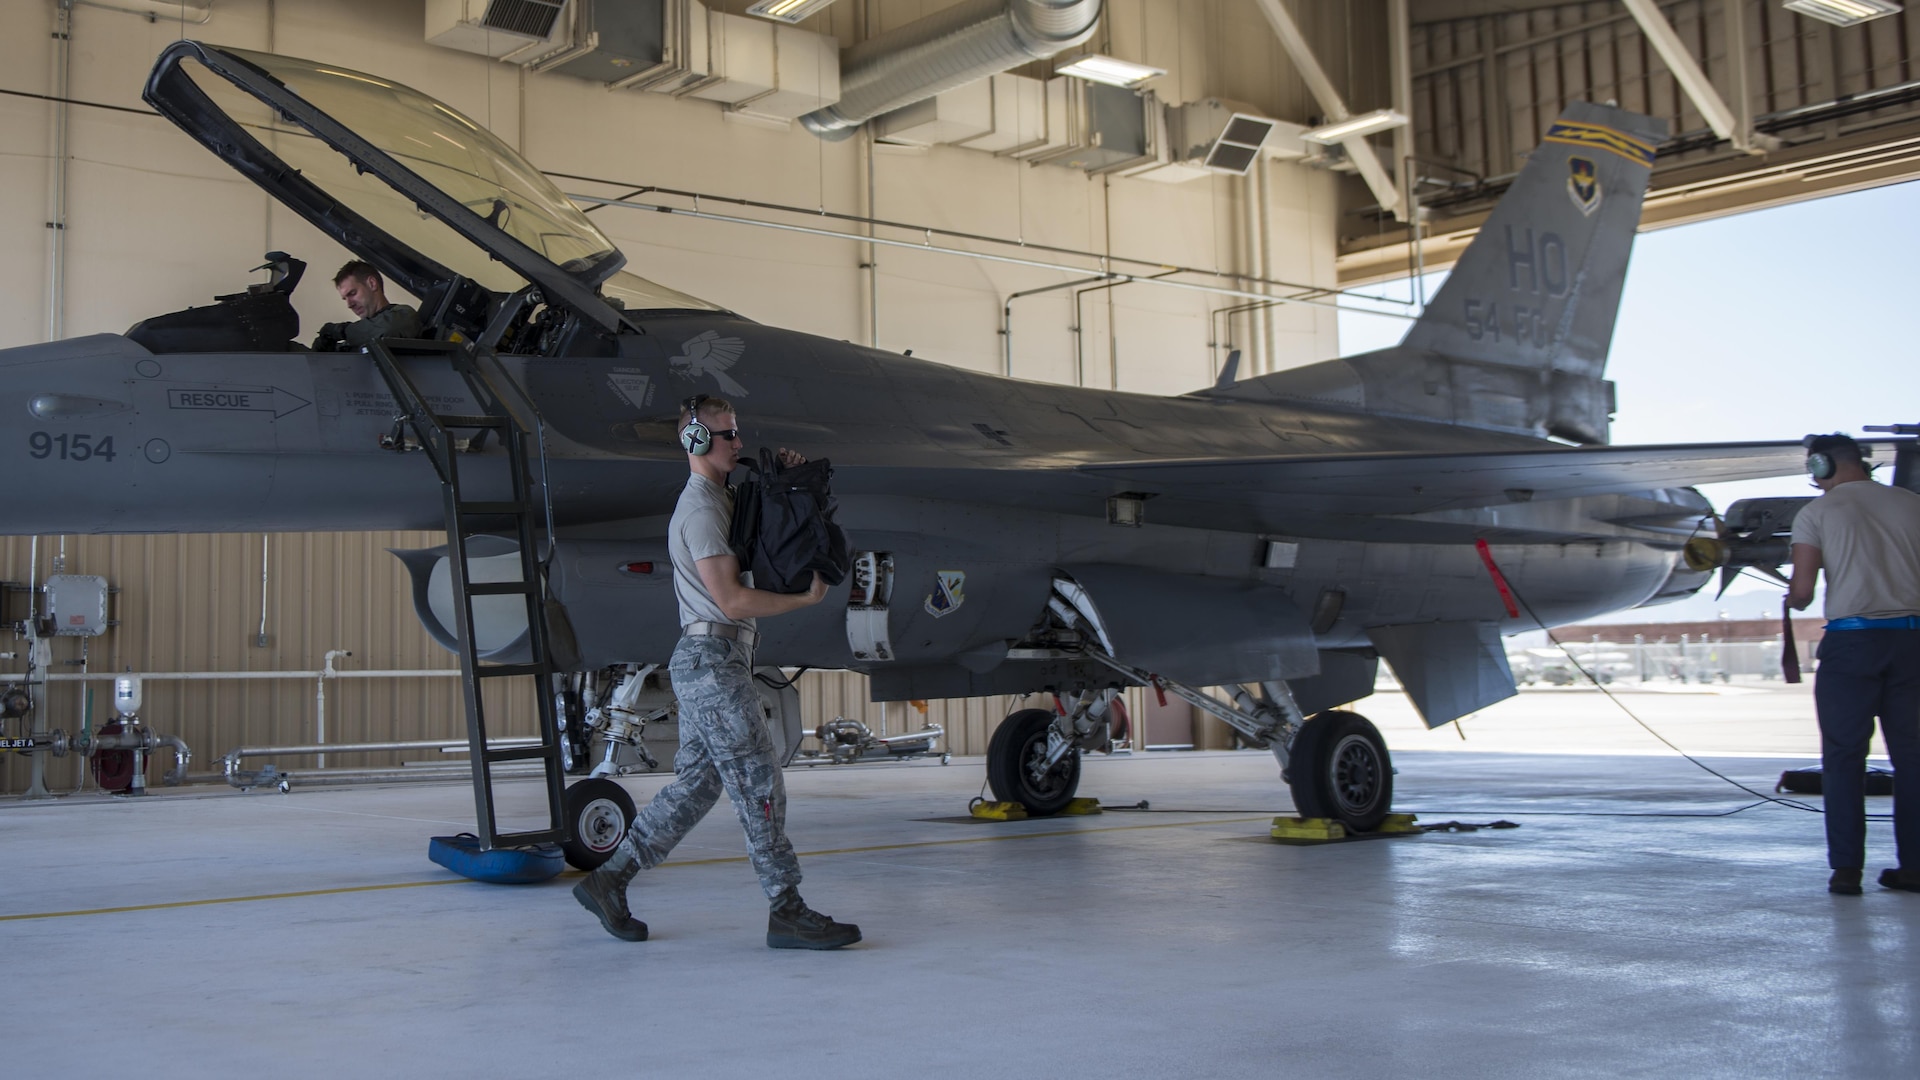 Airman 1st Class Derek King, a 54th Aircraft Maintenance Unit F-16 crew chief, performs recovery operations on an F-16 Fighting Falcon at Holloman Air Force Base, N.M. on May 4, 2017. “The most rewarding aspect of being a crew chief is simply watching the F-16s take off, and knowing that you had hands on that jet—that you might have been the one that launched it out or you might have done some maintaining on it,” King said. (U.S. Air Force photo by Airman 1st Class Alexis P. Docherty) 